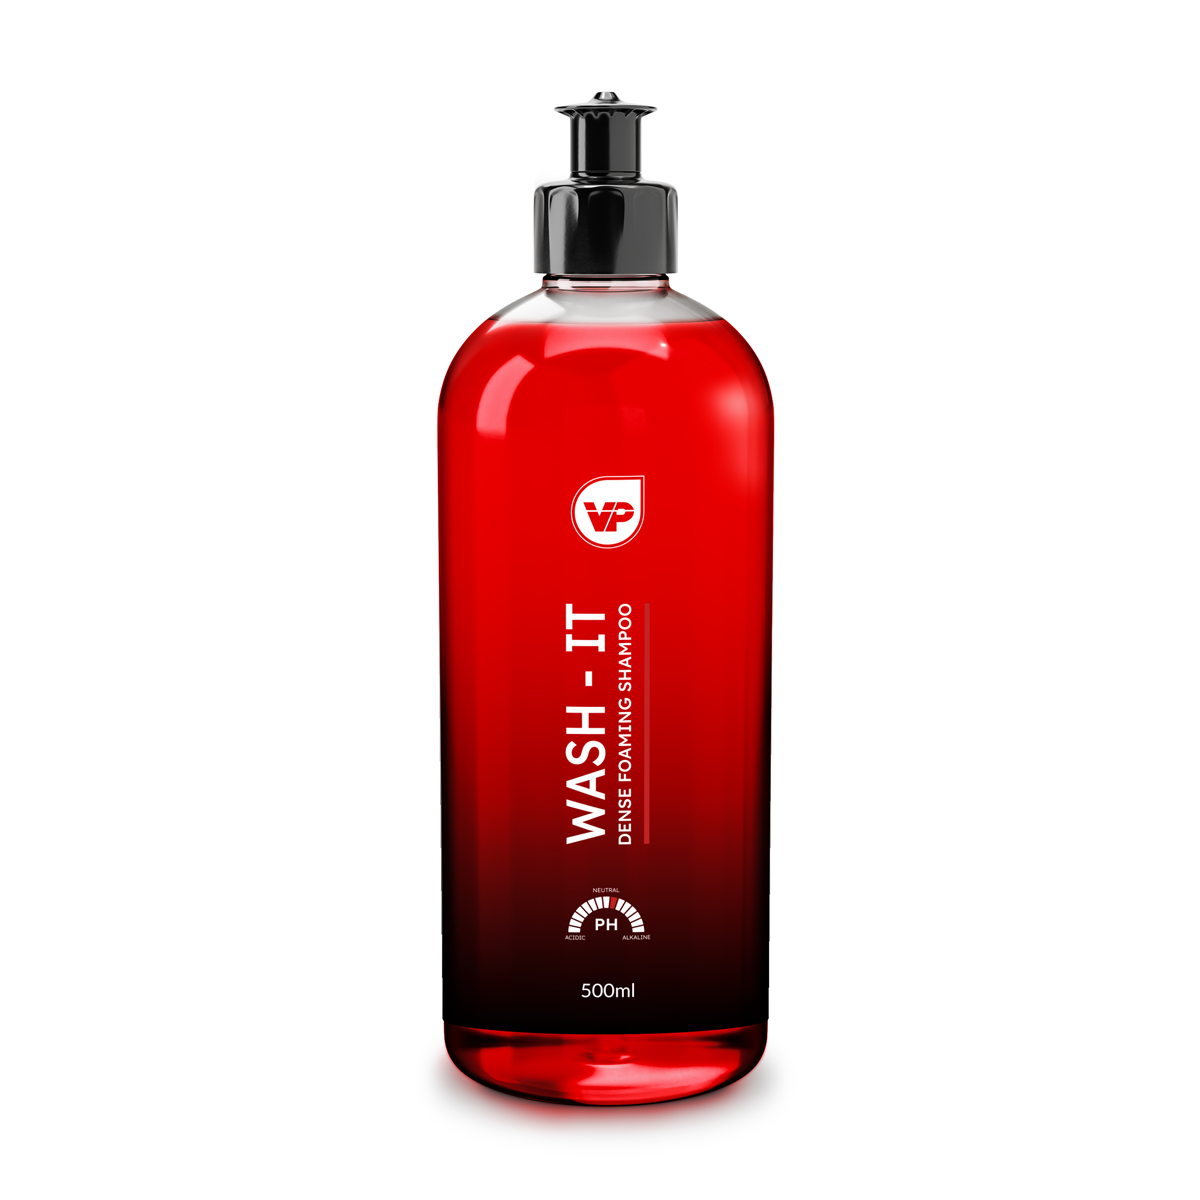 wash it dense foaming highly concentrated car shampoo 